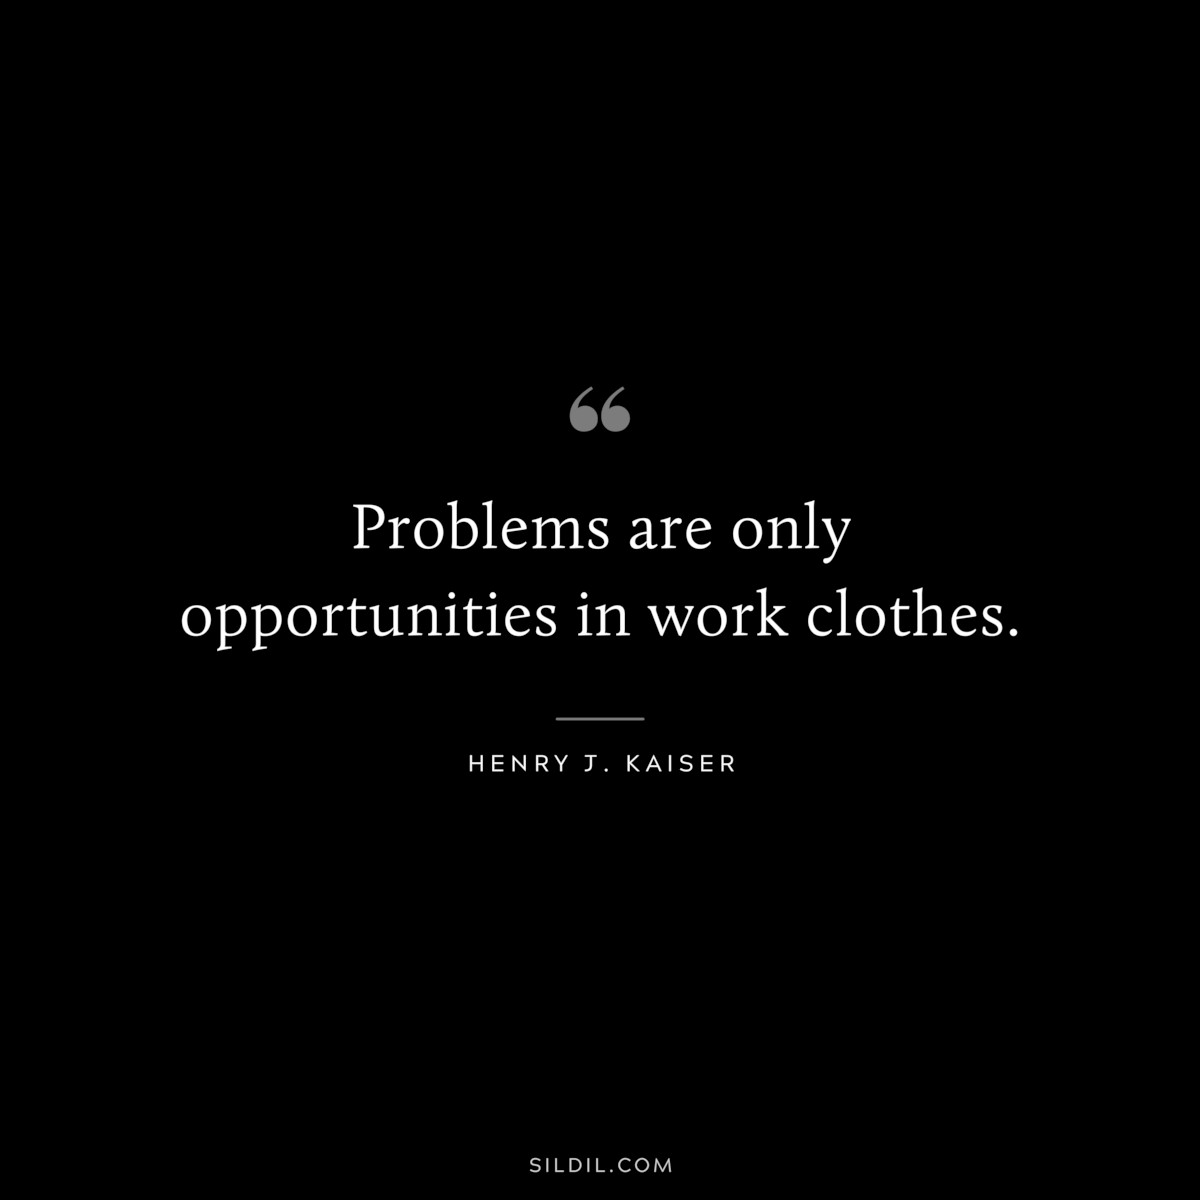 Problems are only opportunities in work clothes. ― Henry J. Kaiser